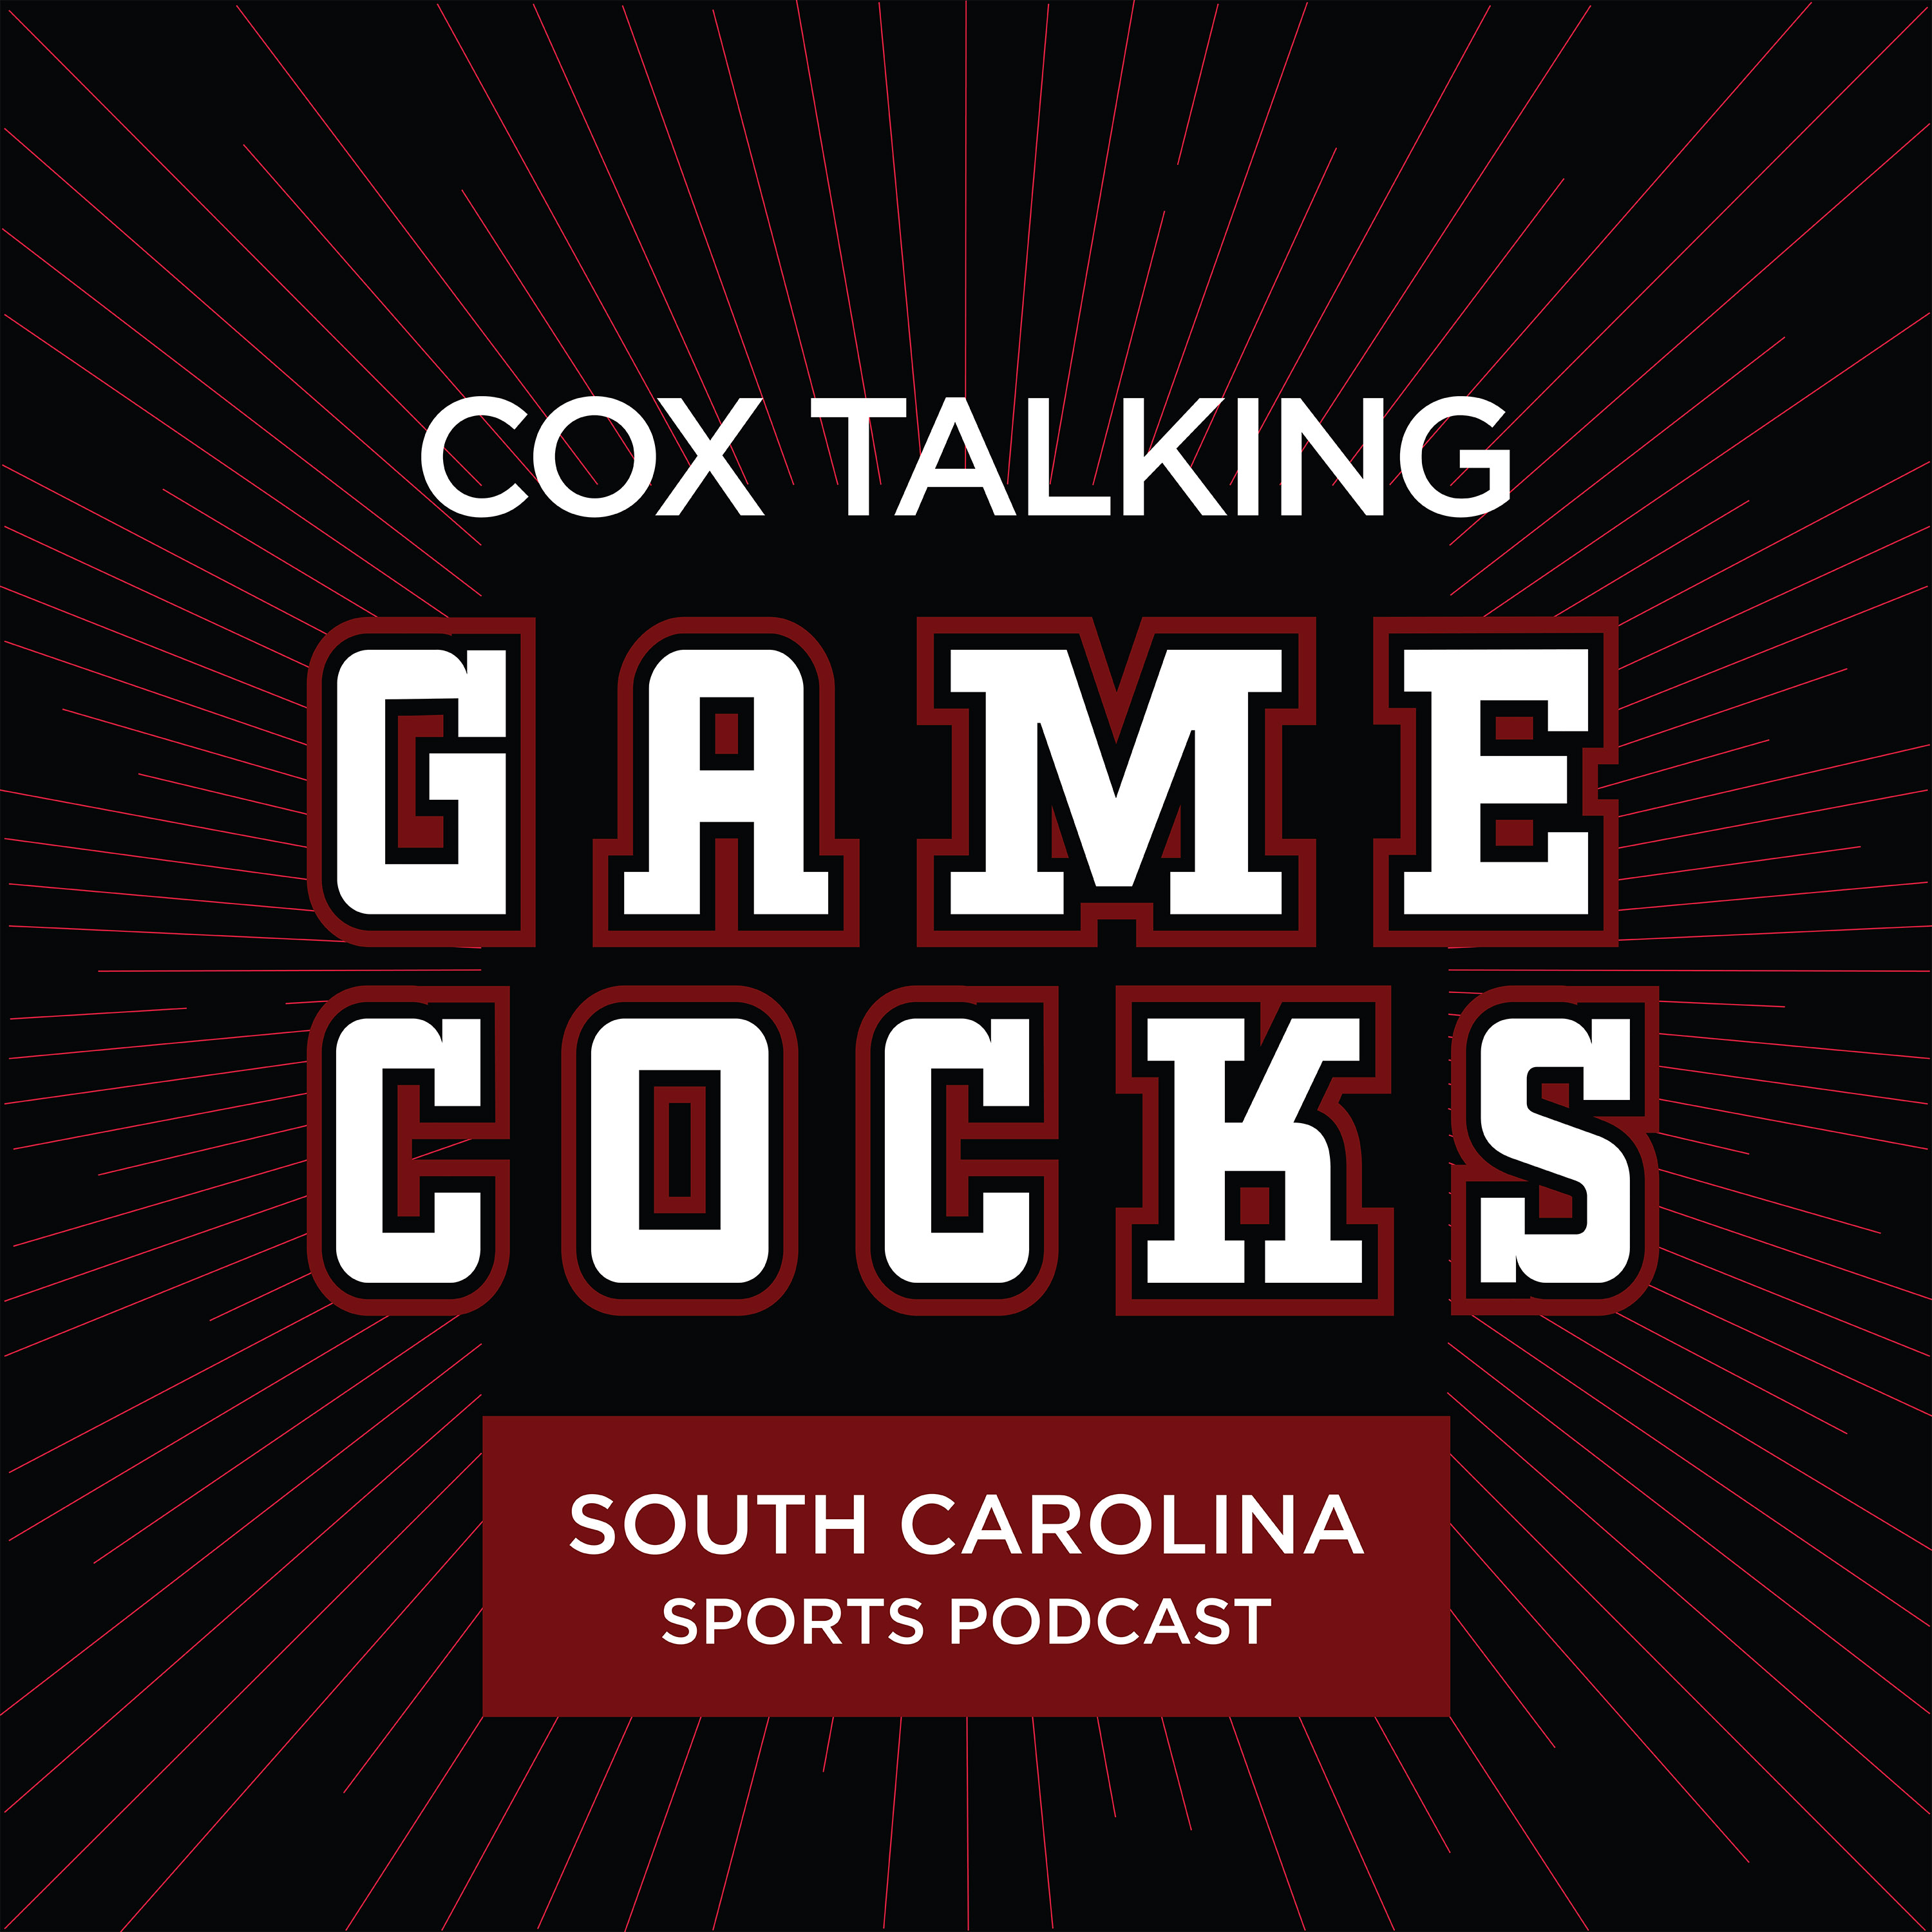 Gamecocks Search For Road Win at A&M: Pregame Analysis & Crows to The Game + Football Personnel Updates